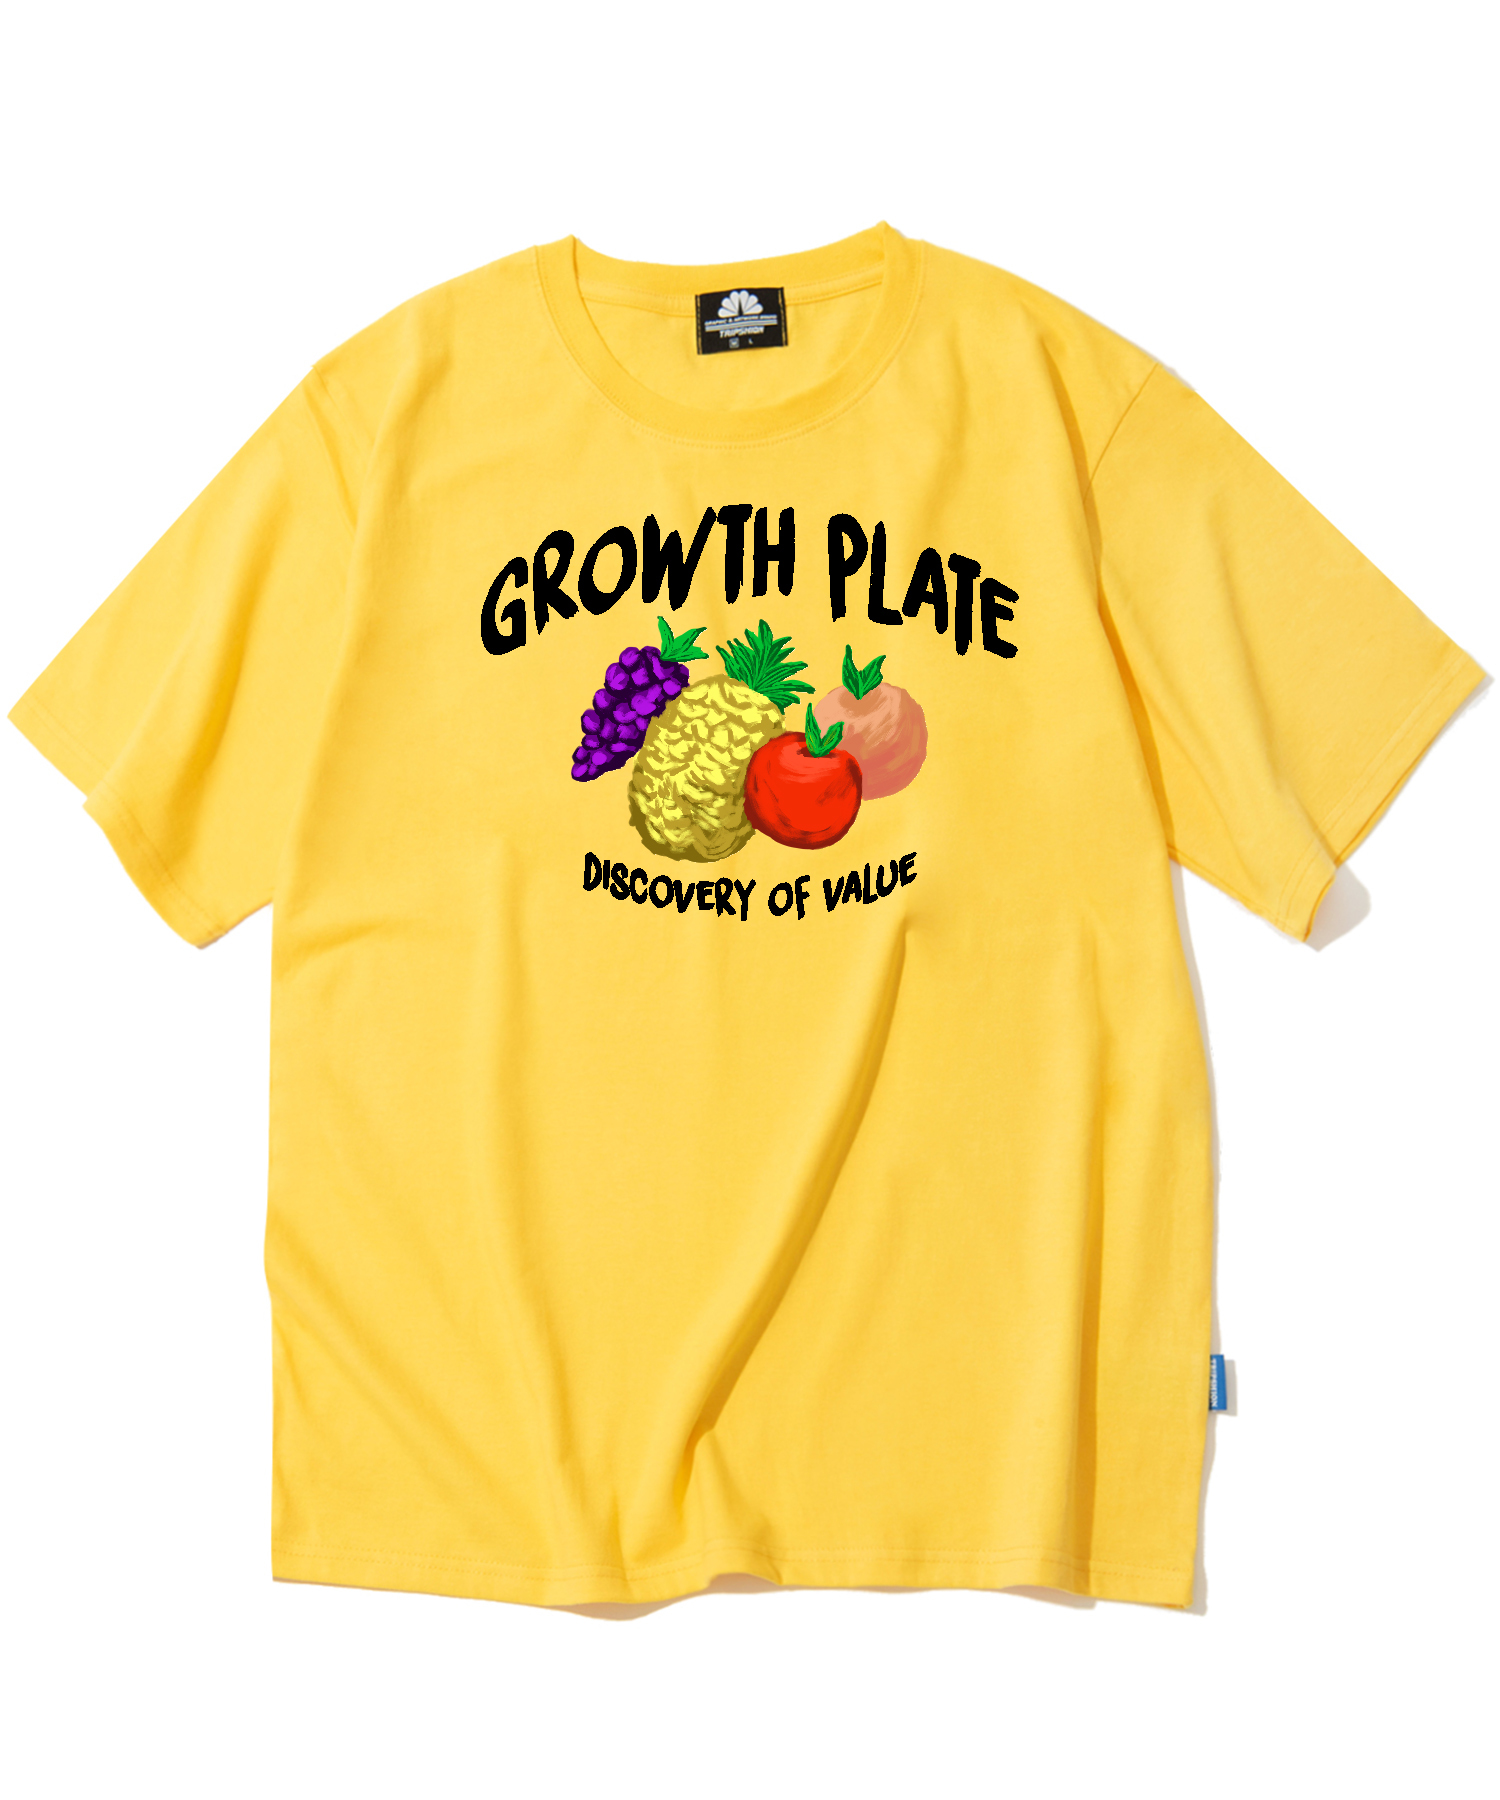 GROWTH PLATE FRUITS GRAPHIC T-SHIRTS - YELLOW